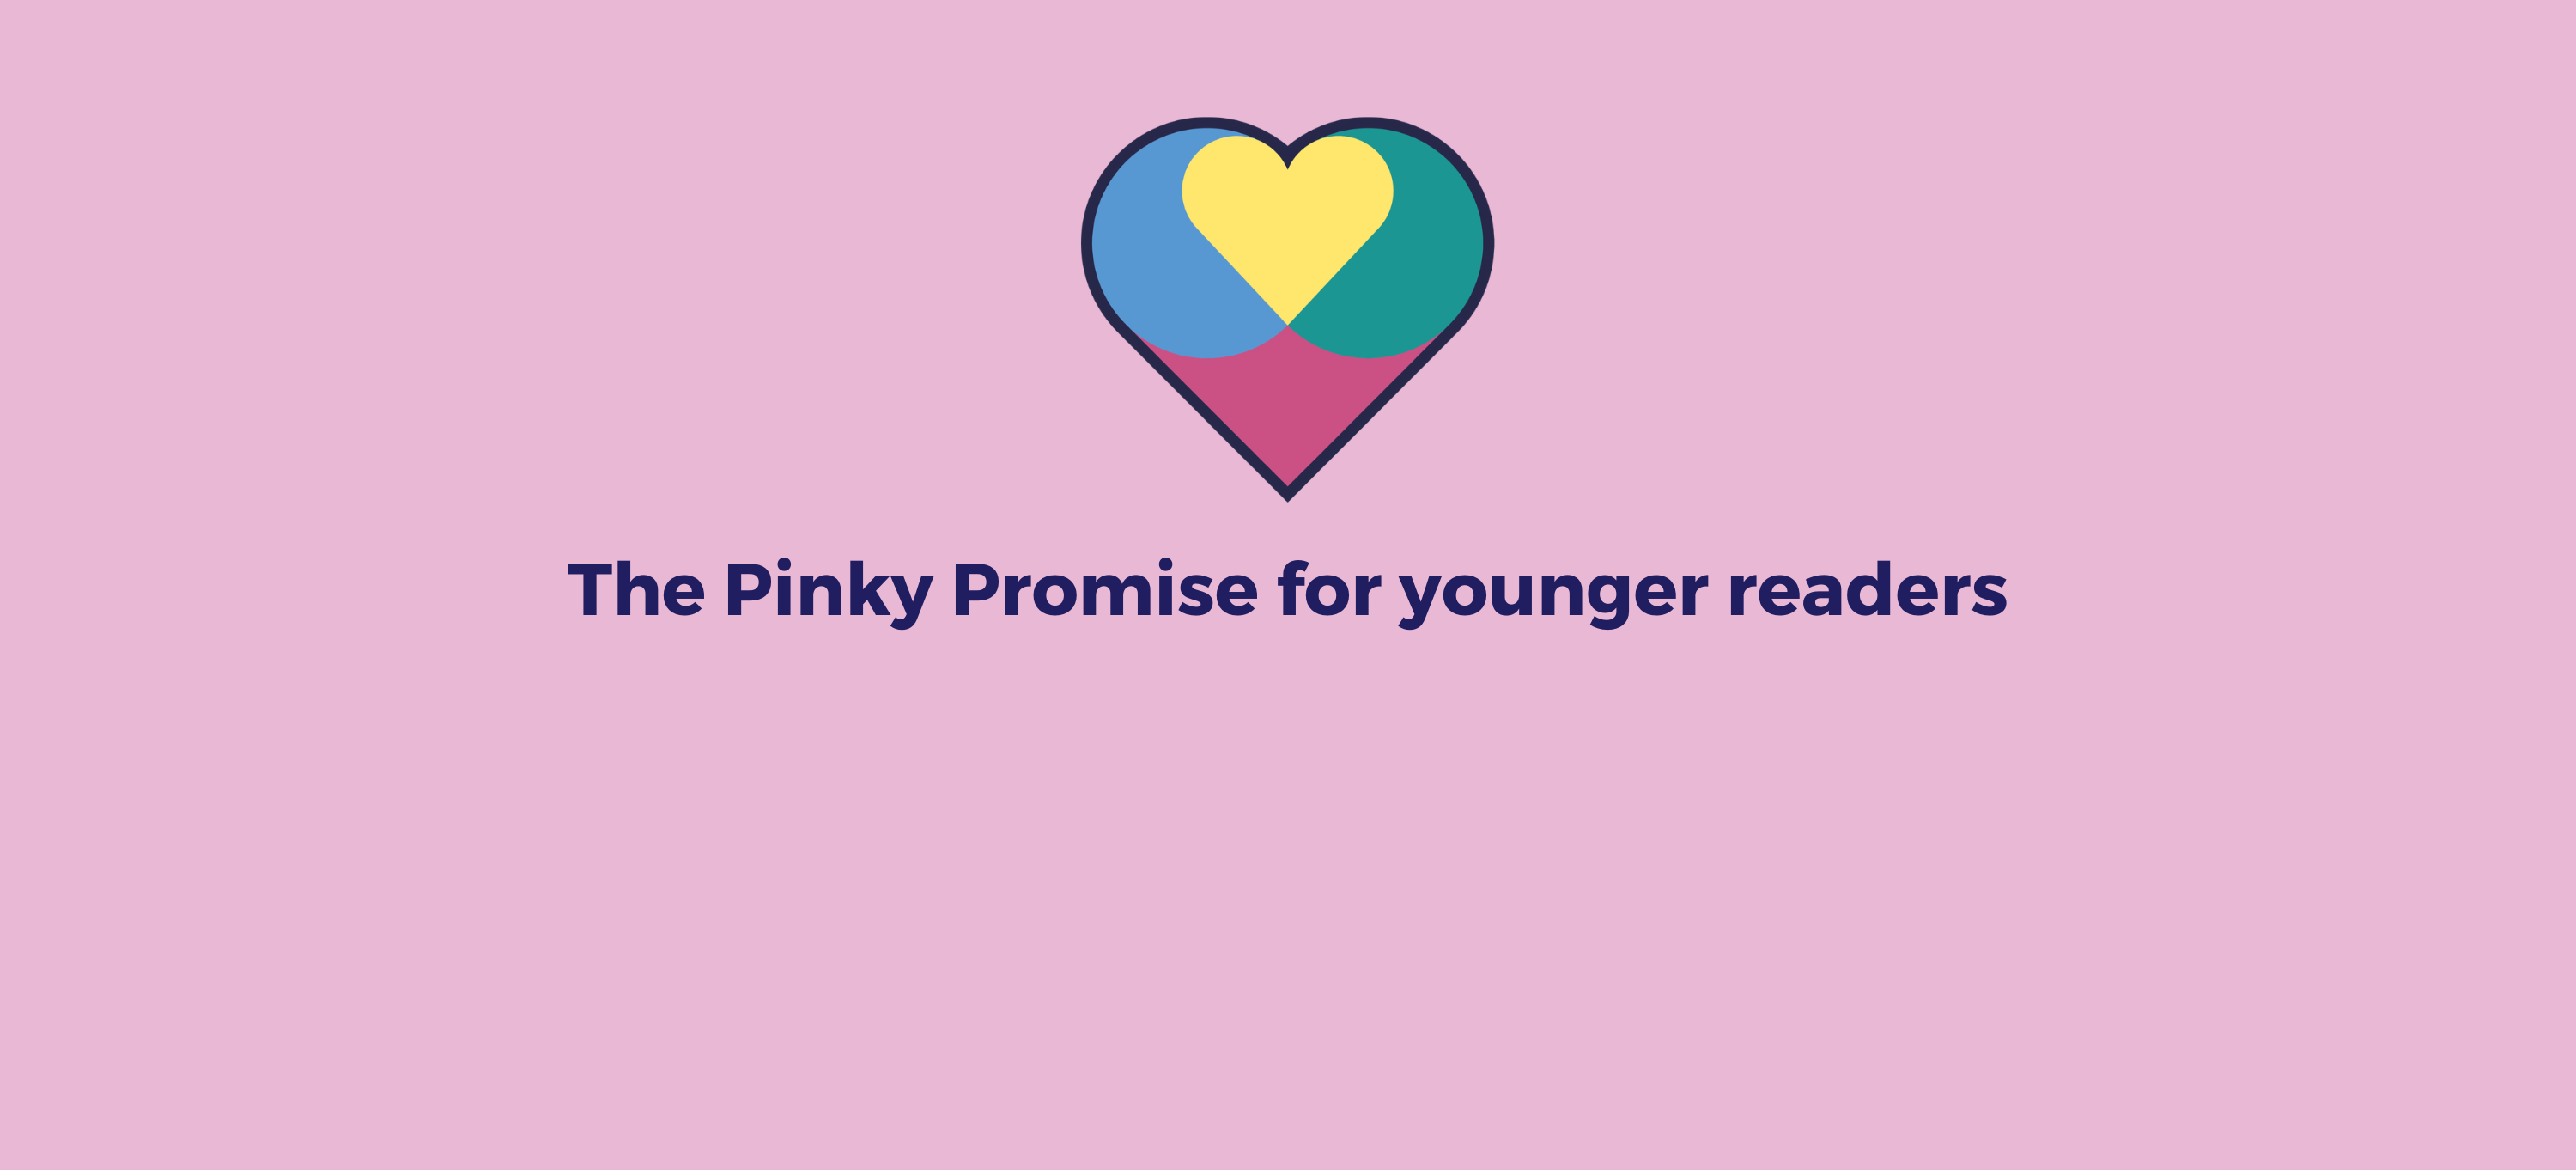 The Pinky Promise for younger readers